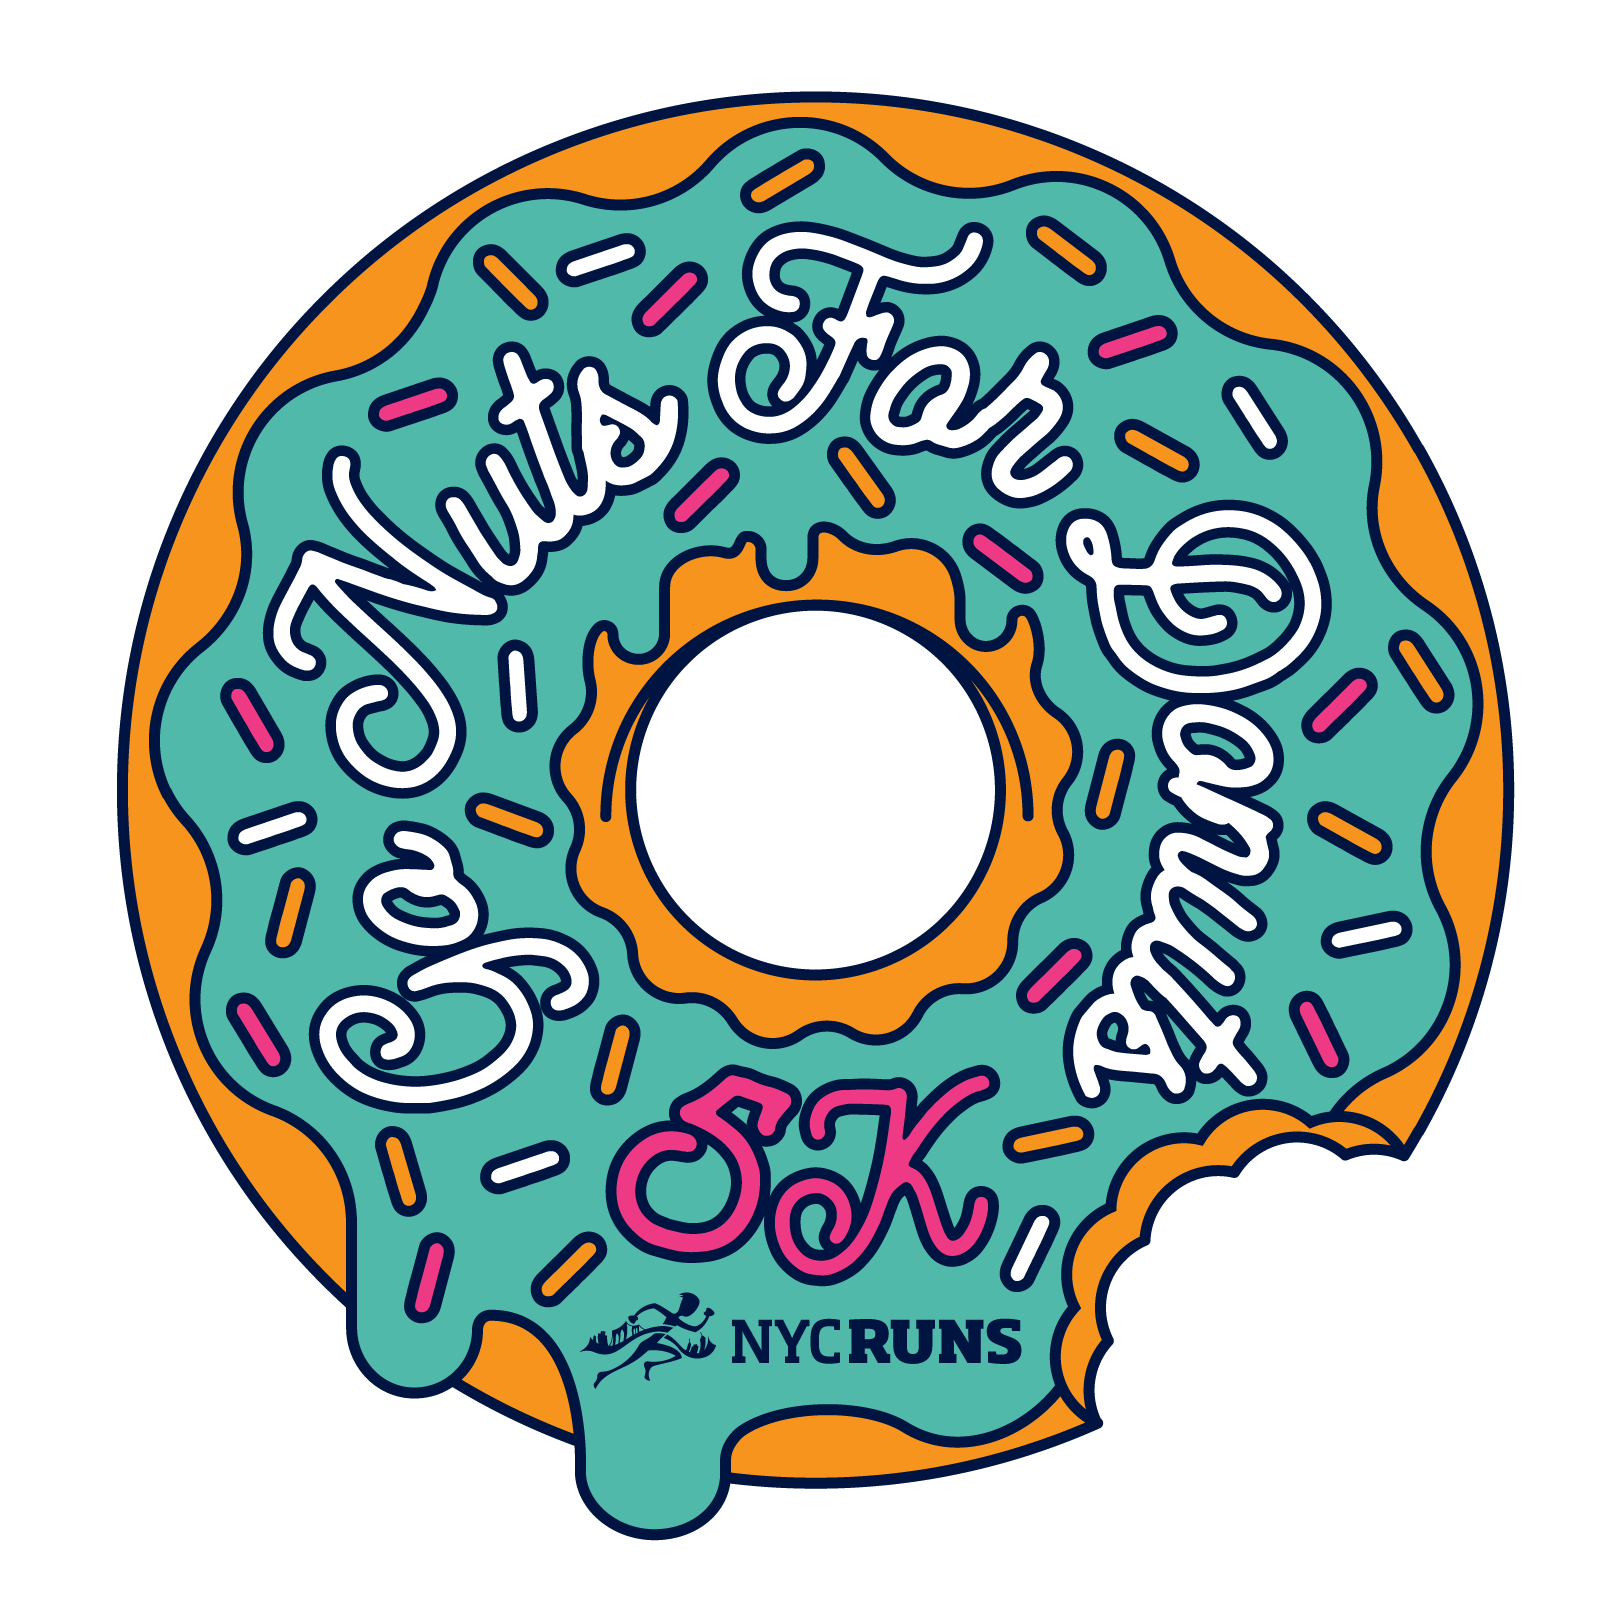 NYCRUNS Go Nuts For Donuts 5K New York, New York Running